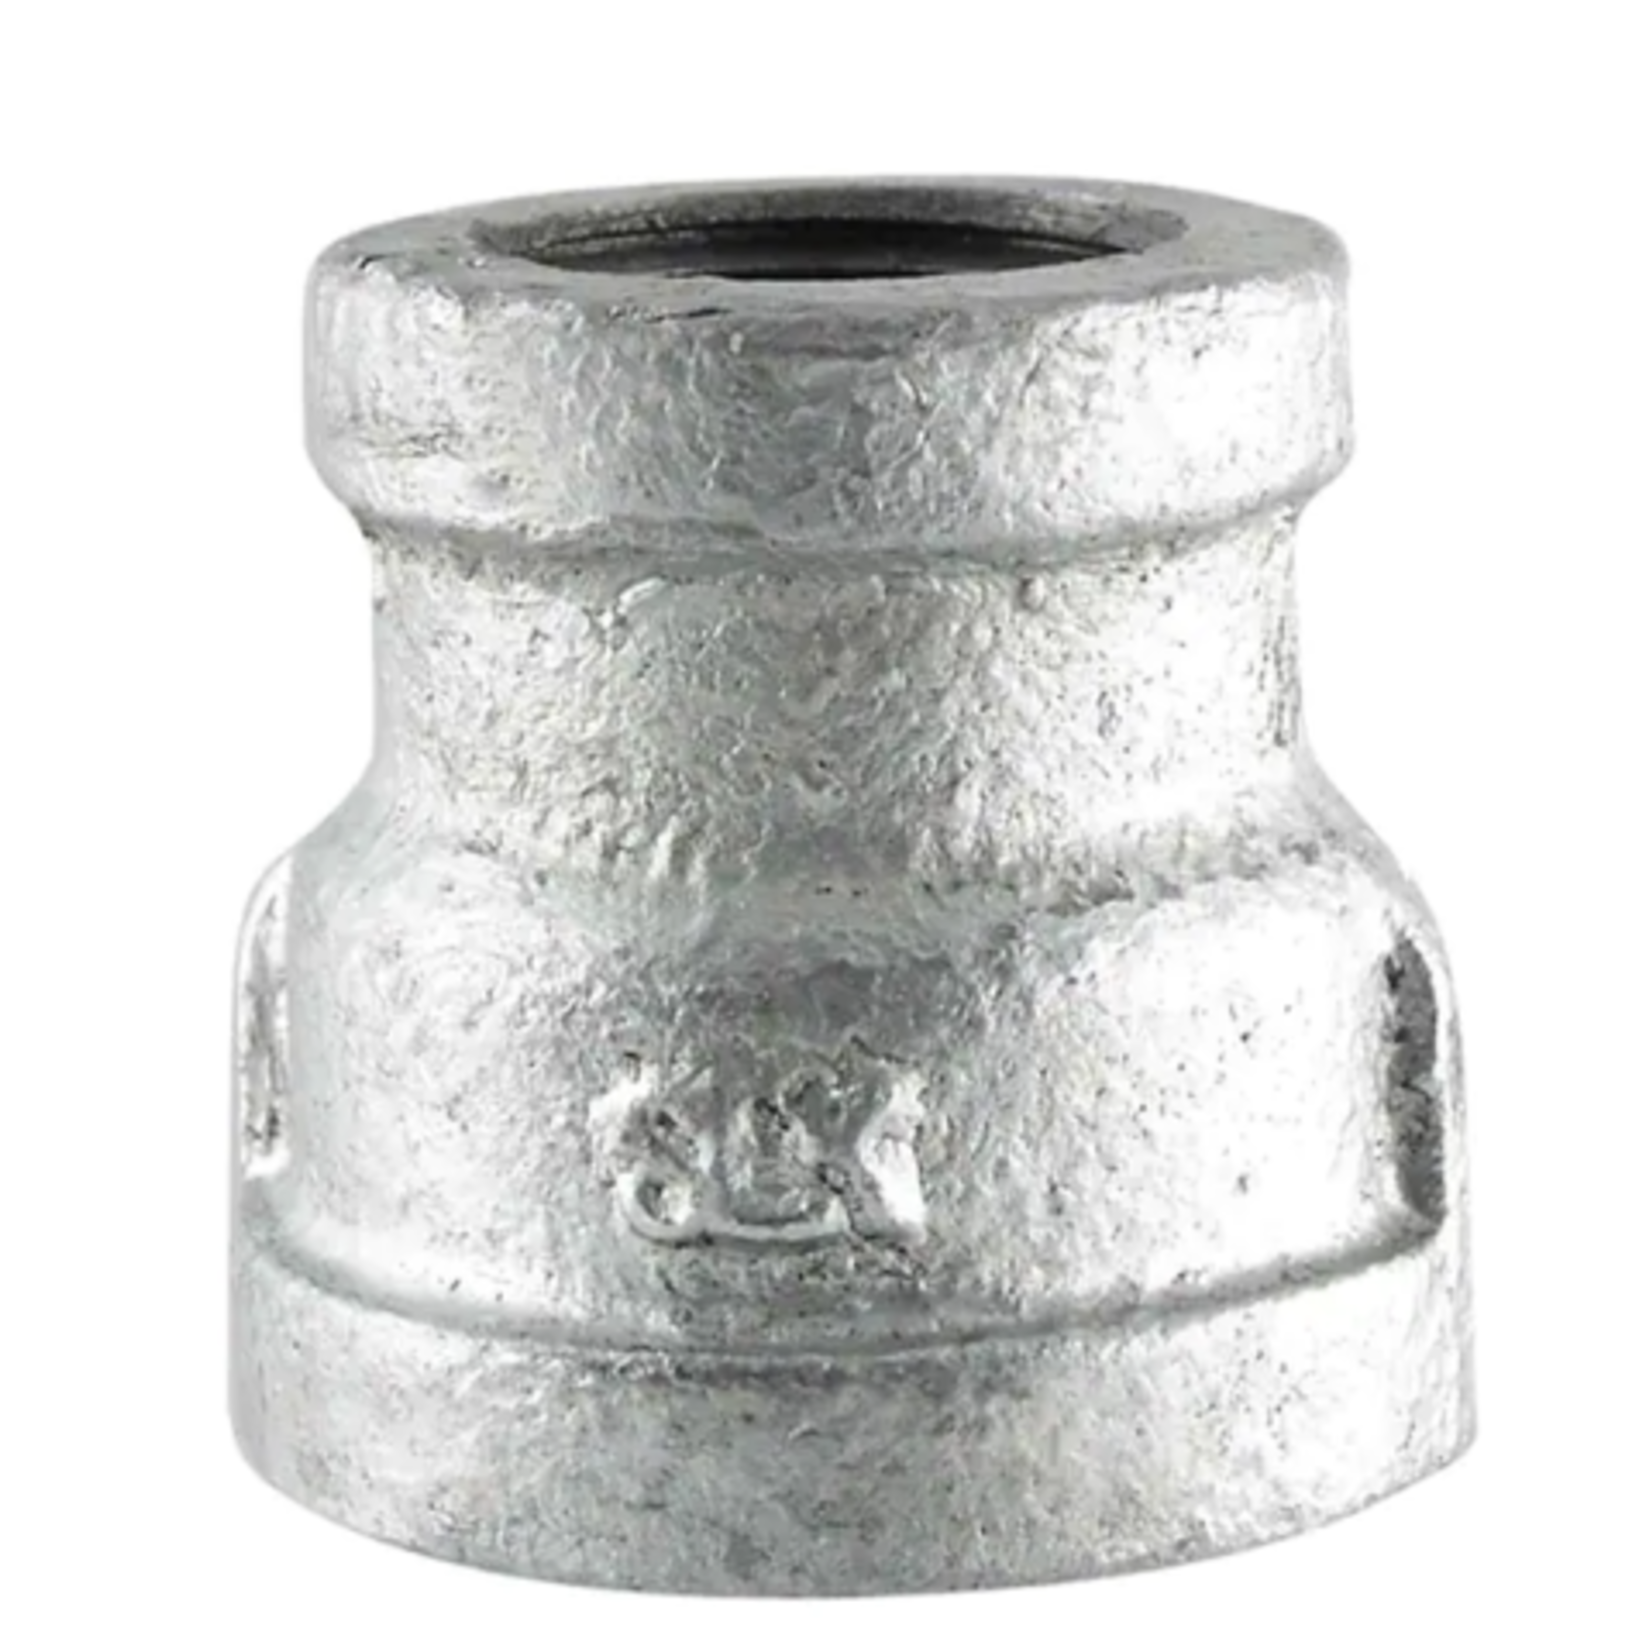 PROPLUS 1 1/4 IN X 1 IN GALVANIZED REDUCER COUPLING